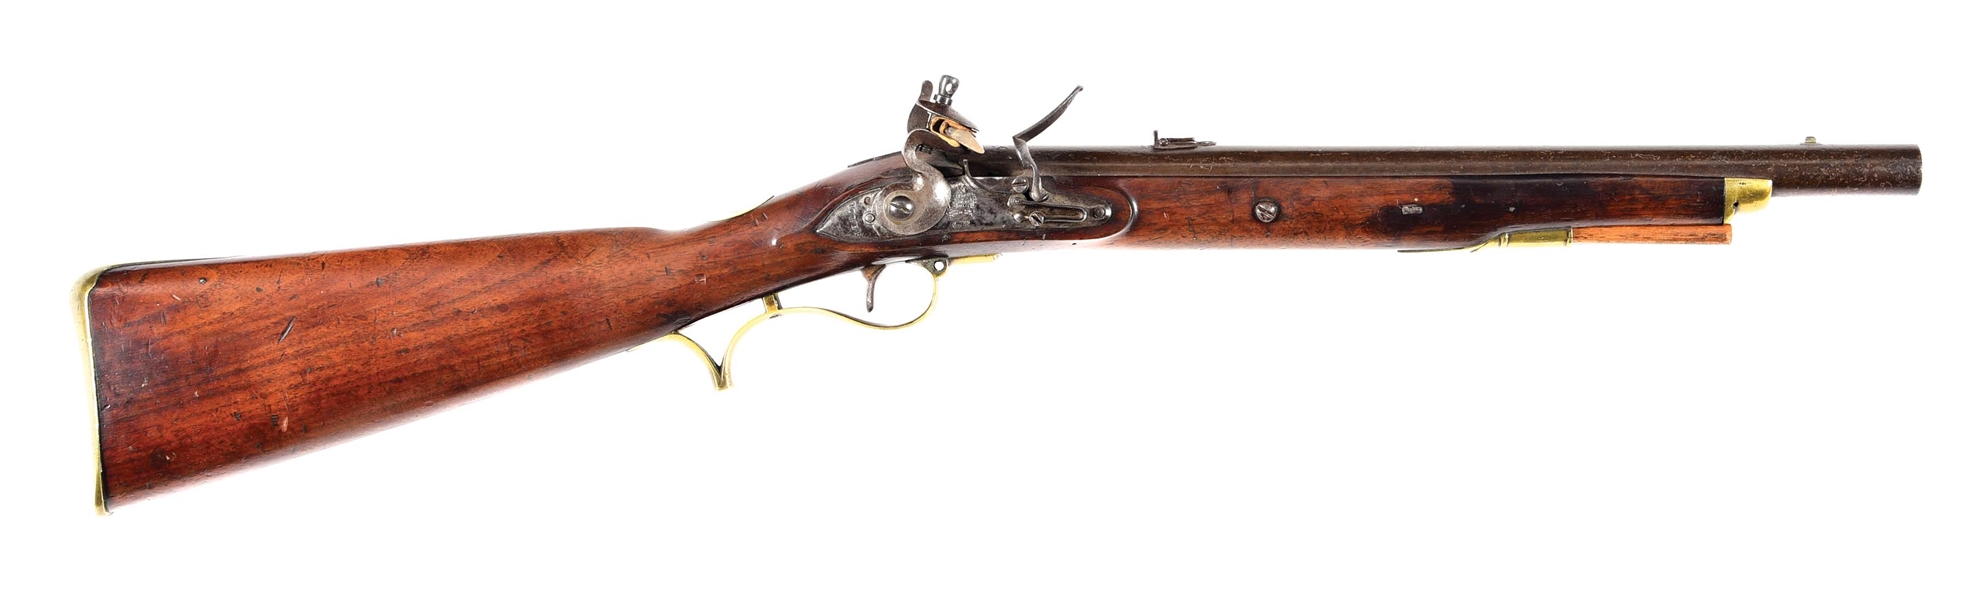 (A) BRITISH CAVALRY CARBINE BELIEVED TO BE OF THE HOMPESCH HUSSARS, ASSOCIATED WITH THE ANGLO-FRENCH REVOLUTIONARY WARS AND THE 1798 UNITED IRISHMEN REBELLION LED BY WOLFE TONE.